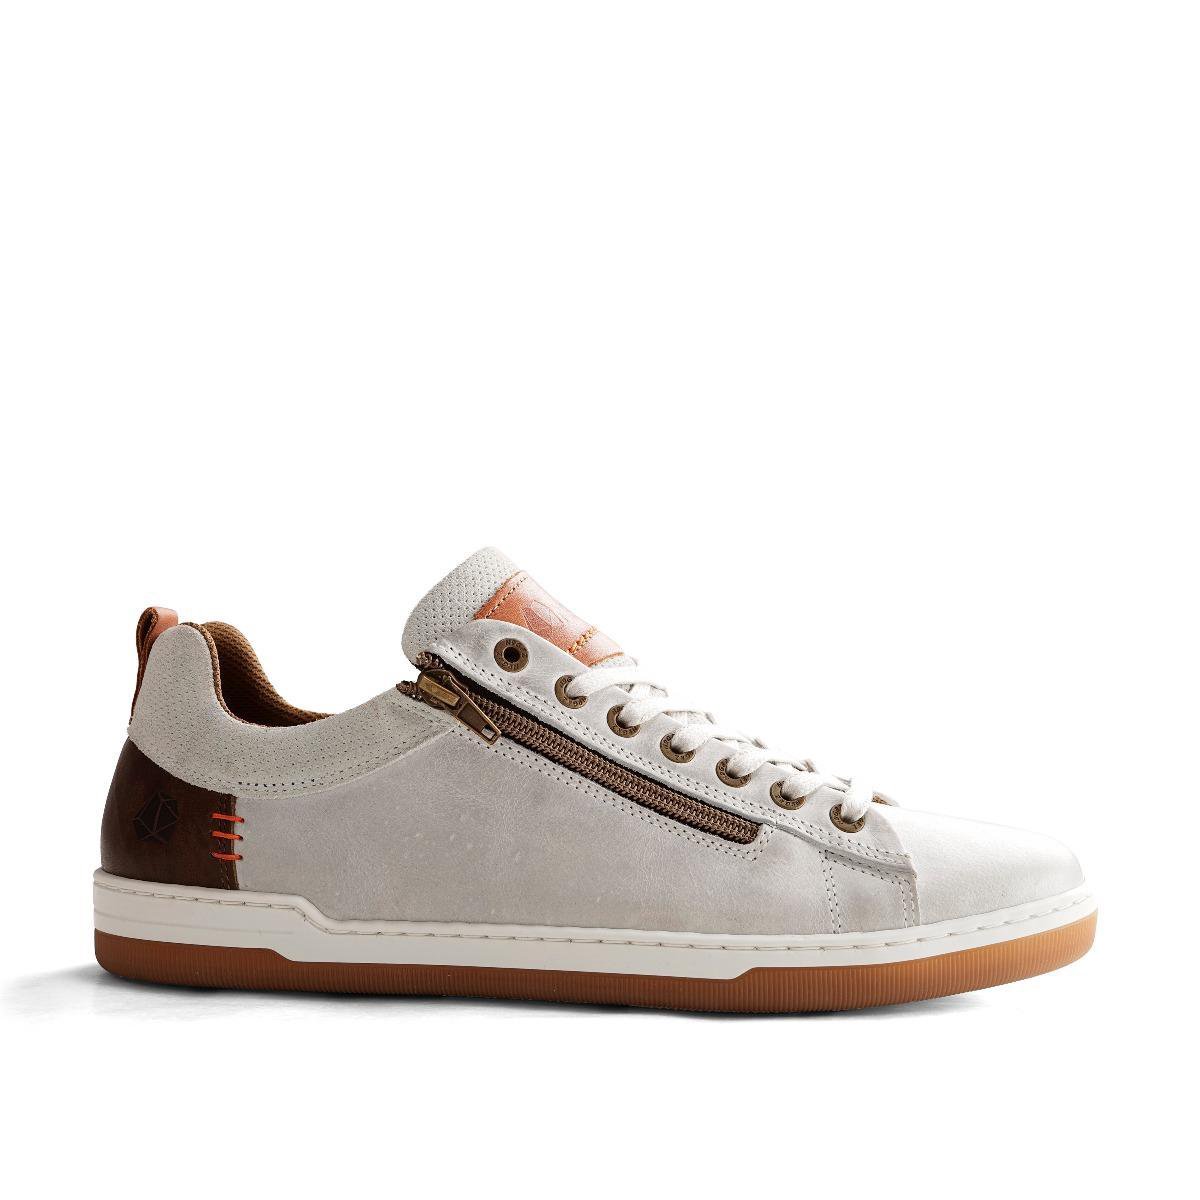 Nogrz Maderno Heren Sneakers Greece, SAVE 37% - fearthemecca.com